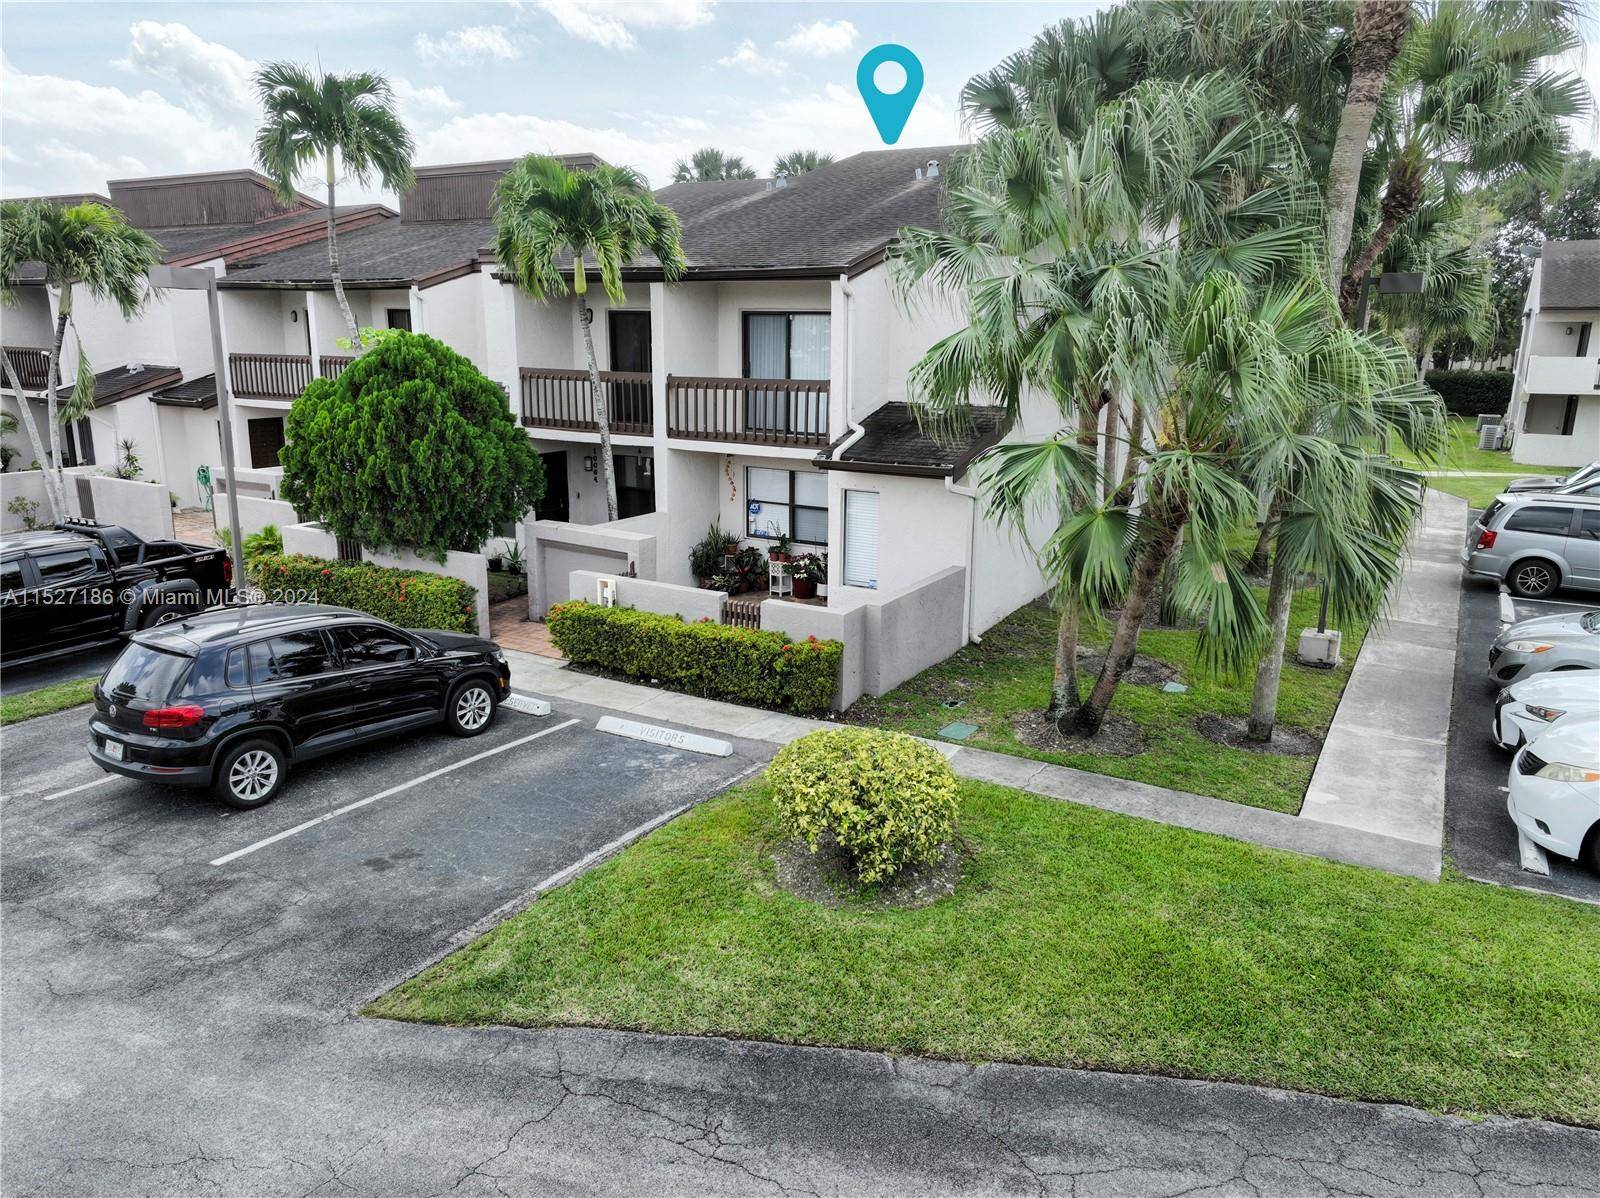 Welcome to your dream home in the heart of Doral !